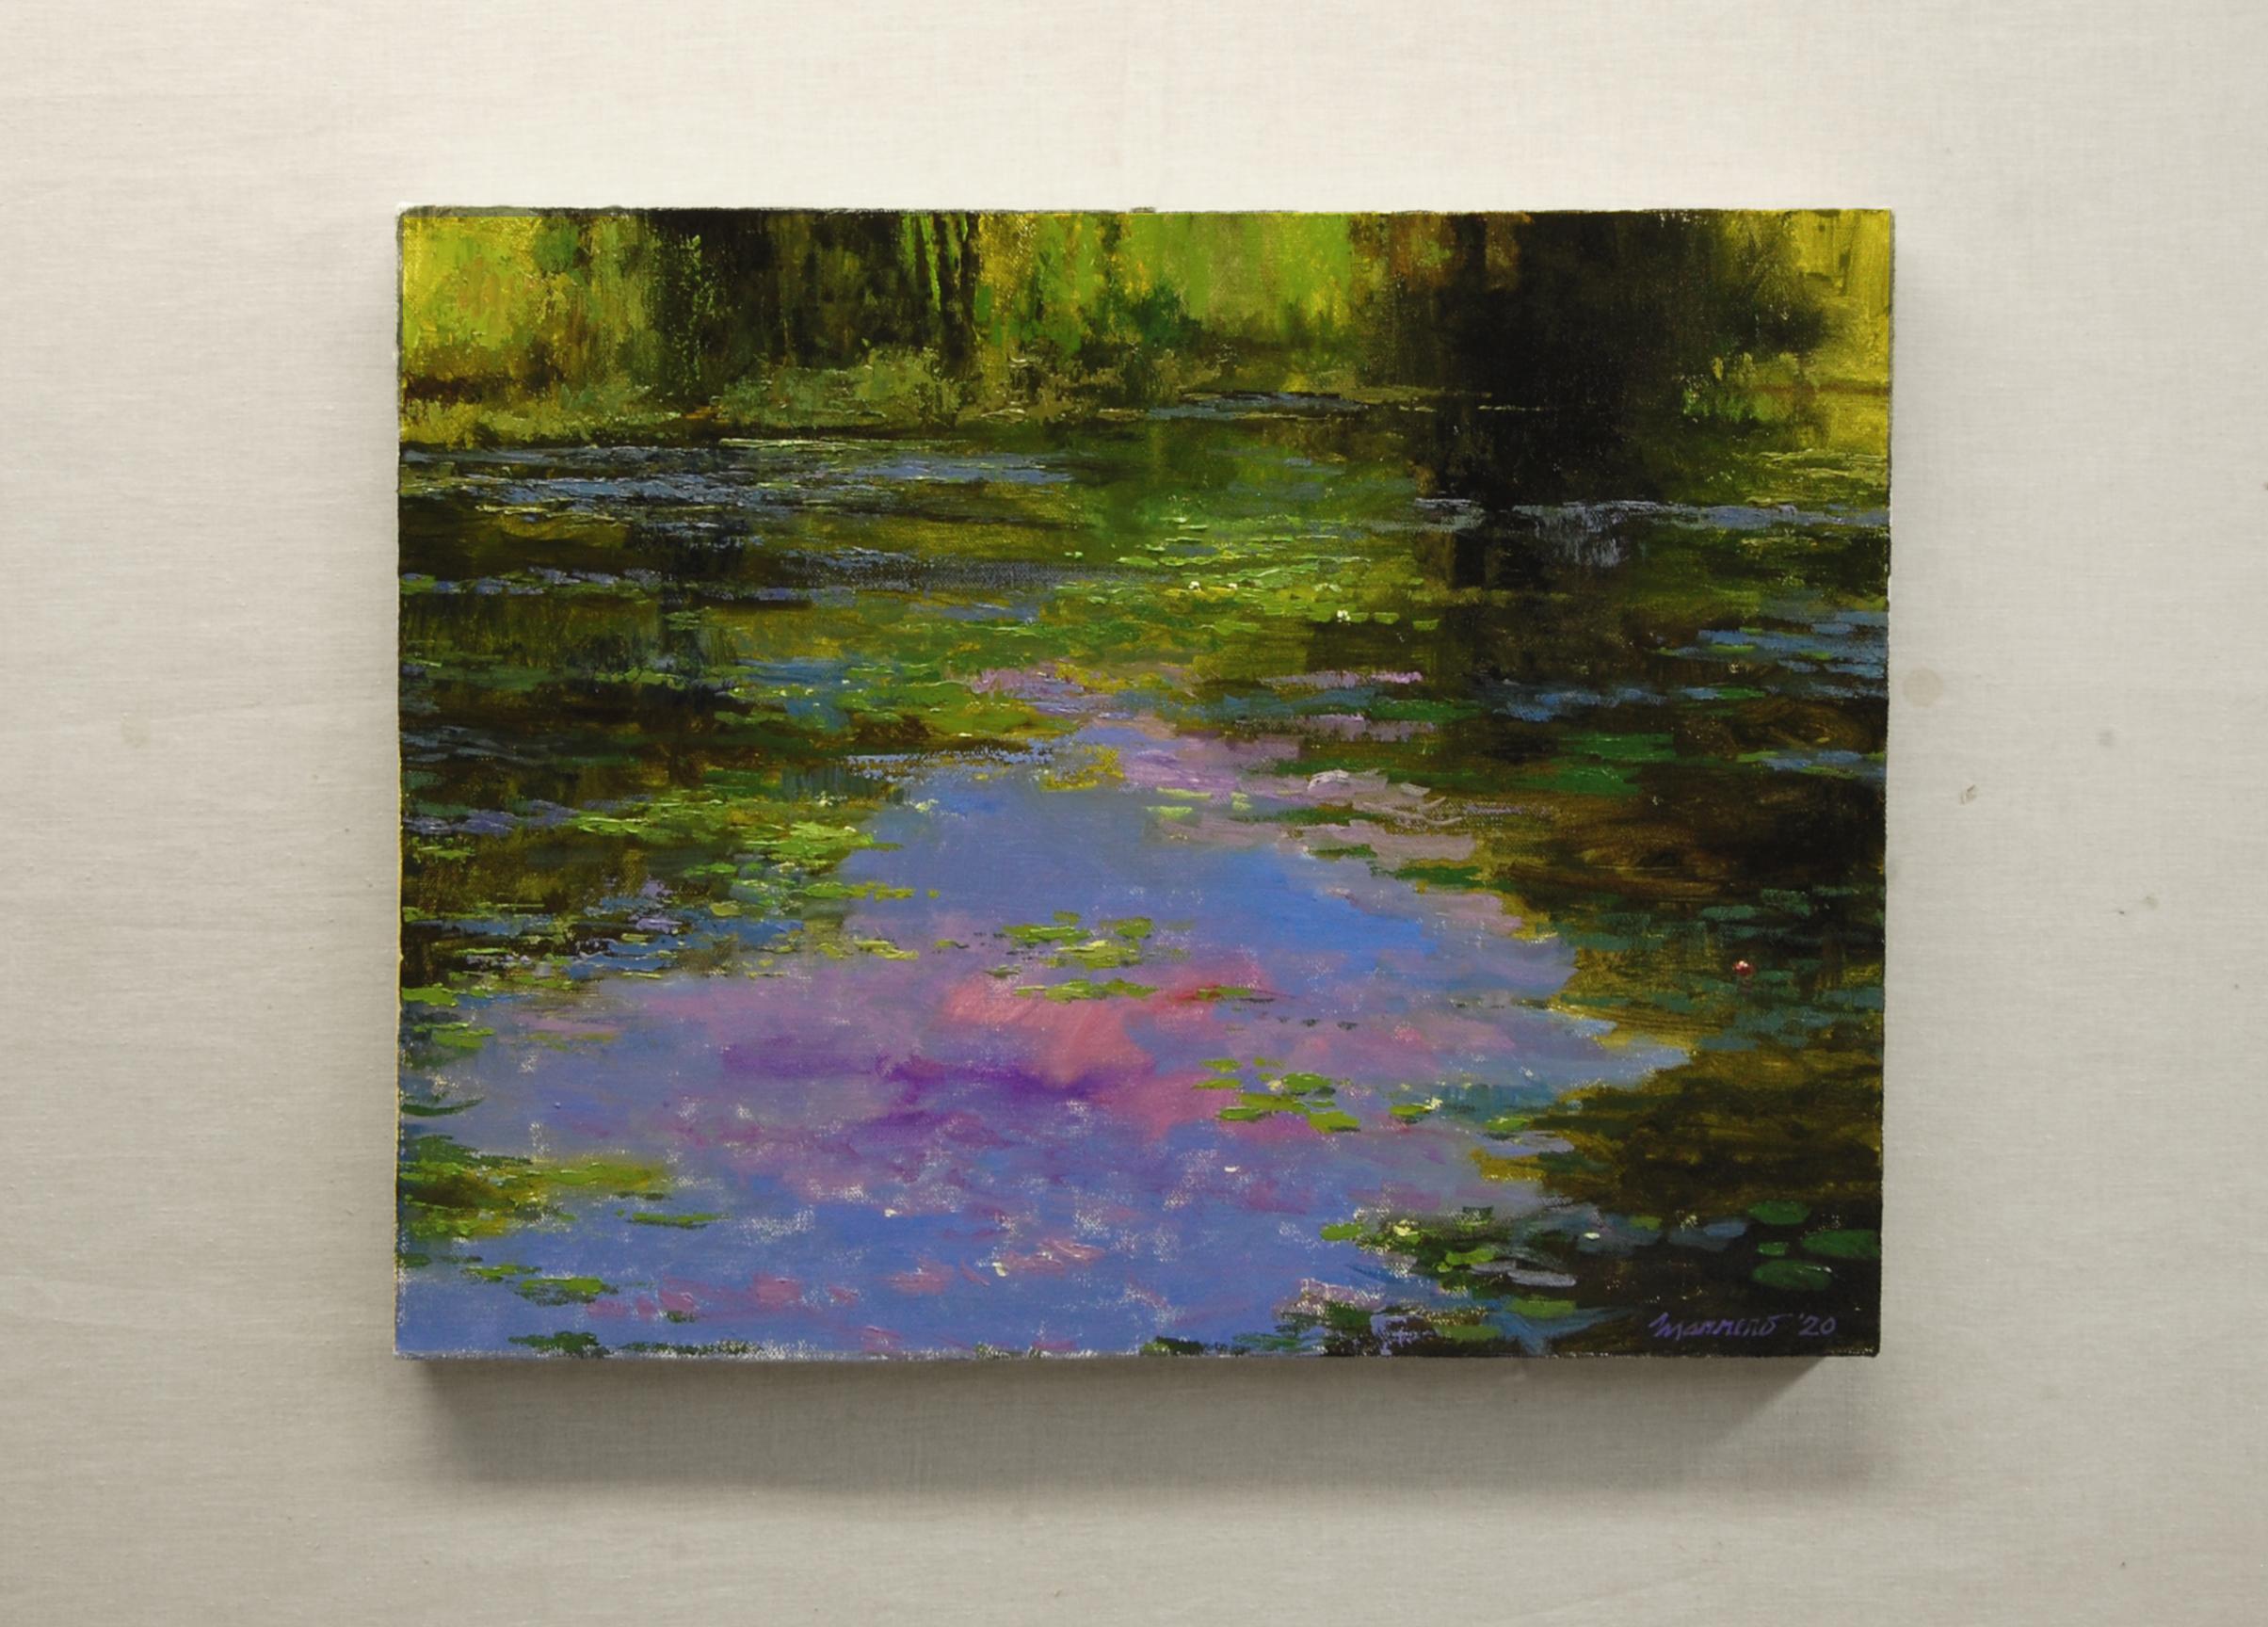 <p>Artist Comments<br />Artist Onelio Marrero painted this early autumn scene of a pond from a memory of a singularly peaceful nature walk. He focused on the late afternoon sunlight stretching out across the water and warming the far bank. 